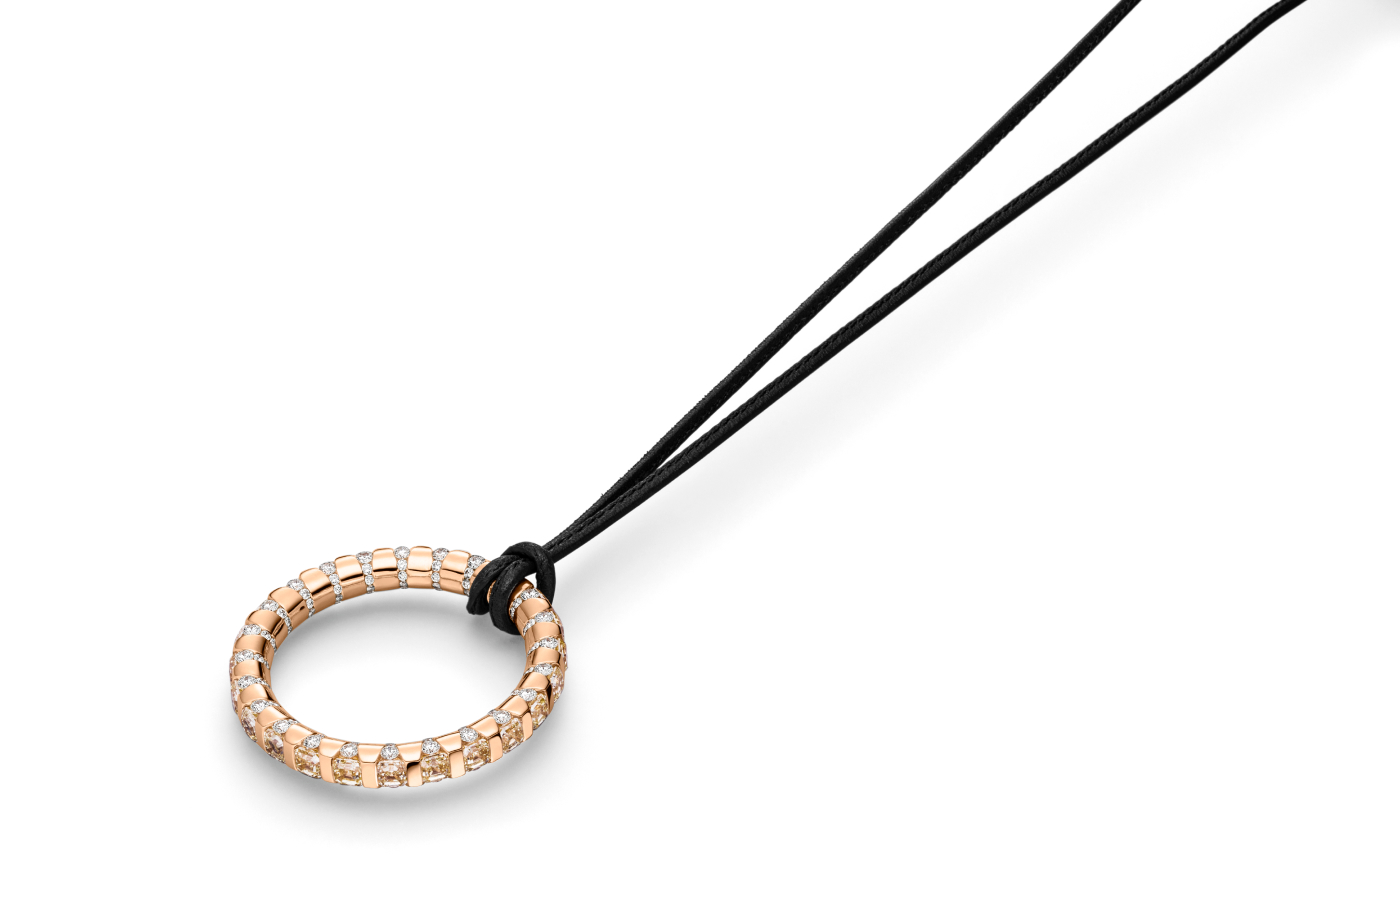 Schaffrath Paradoxal necklace in 18k rose gold with an adjustable leather strap, set with 6.05 carats of Asscher-cut diamonds in very light brown hues, and more than two carats of round brilliant-cut diamonds 